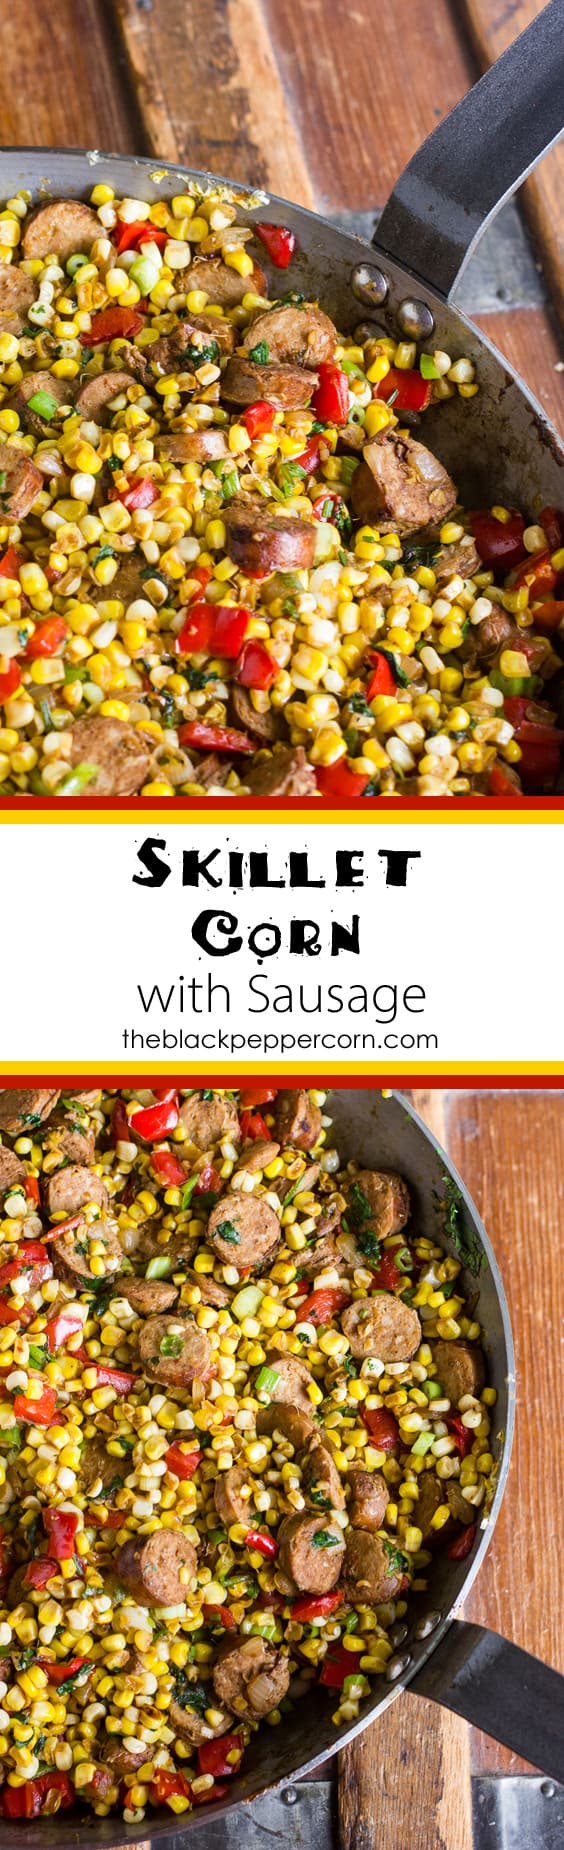 Fried corn cut off the cob and sausage make a delicious side dish. How to make instructions using a carbon steel or cast iron skillet